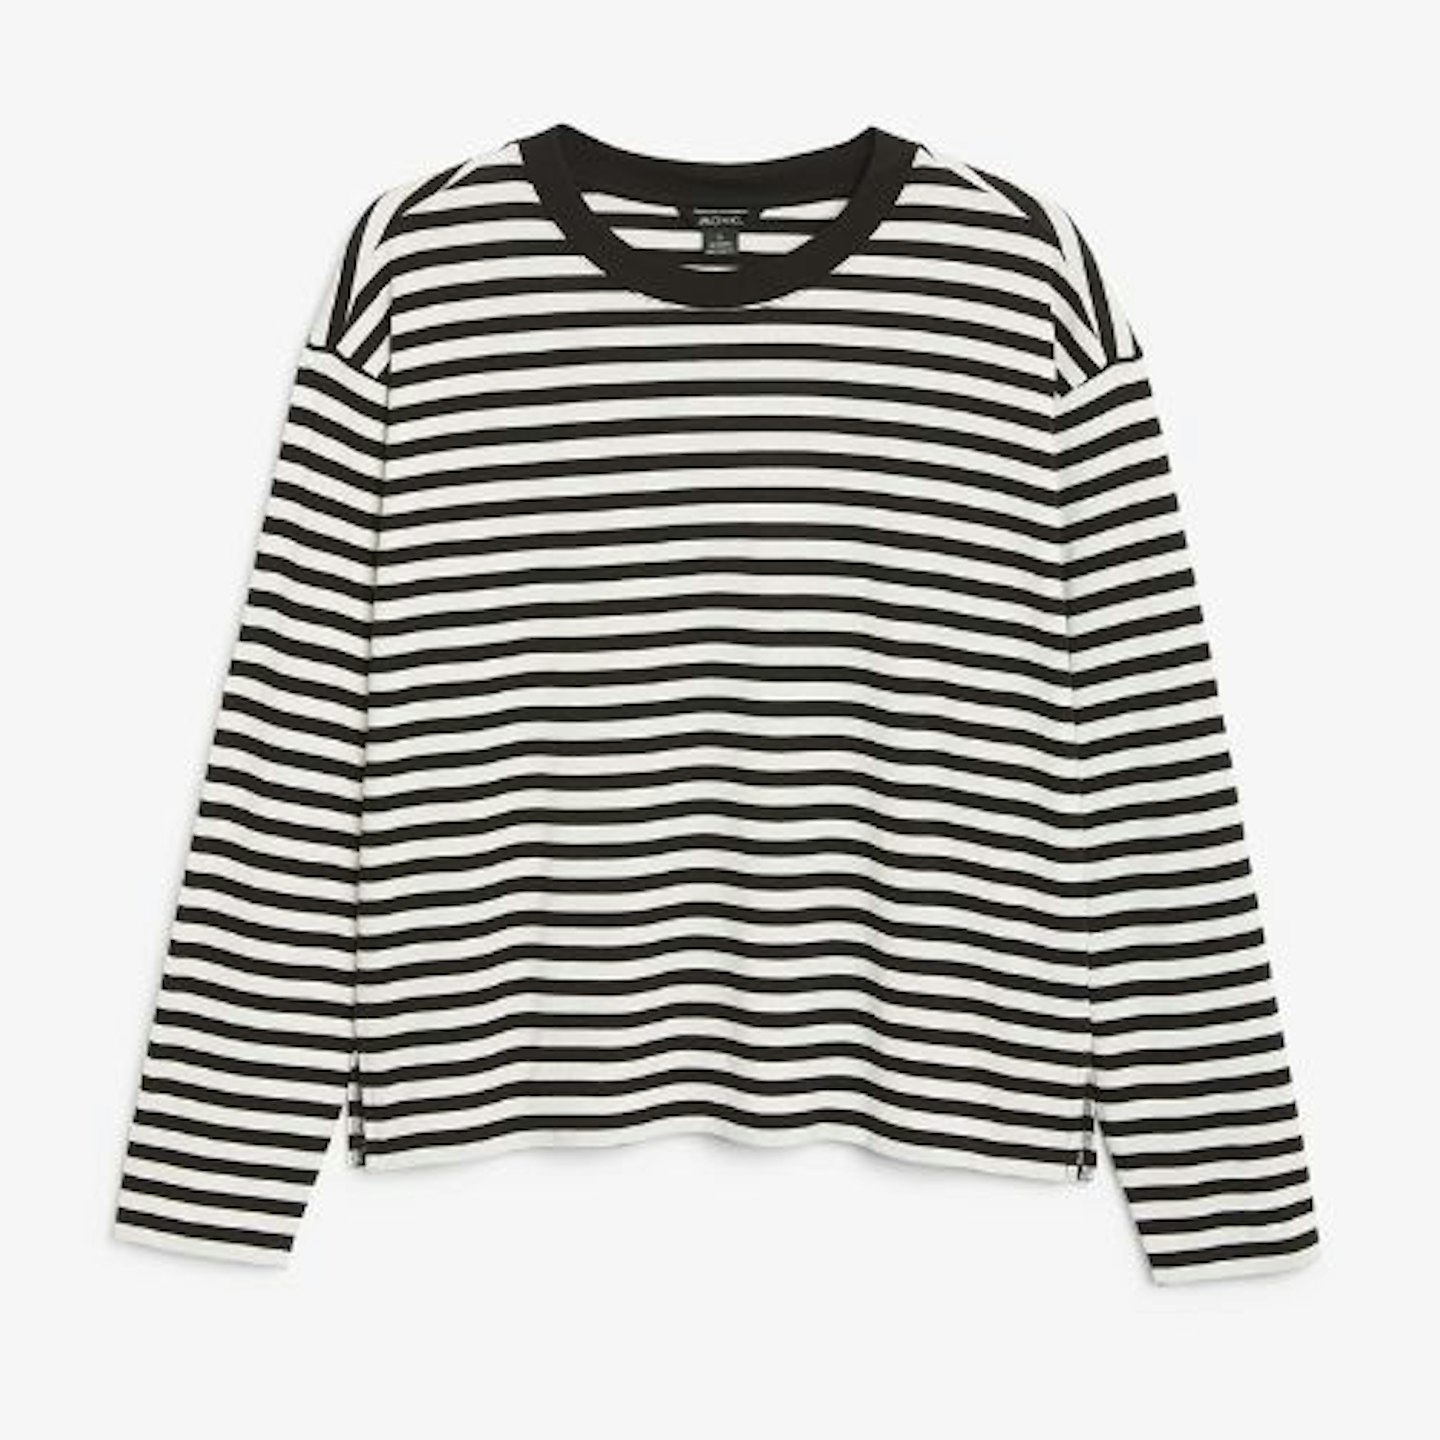 Monki, Black And White Striped Soft Long-Sleeve Top